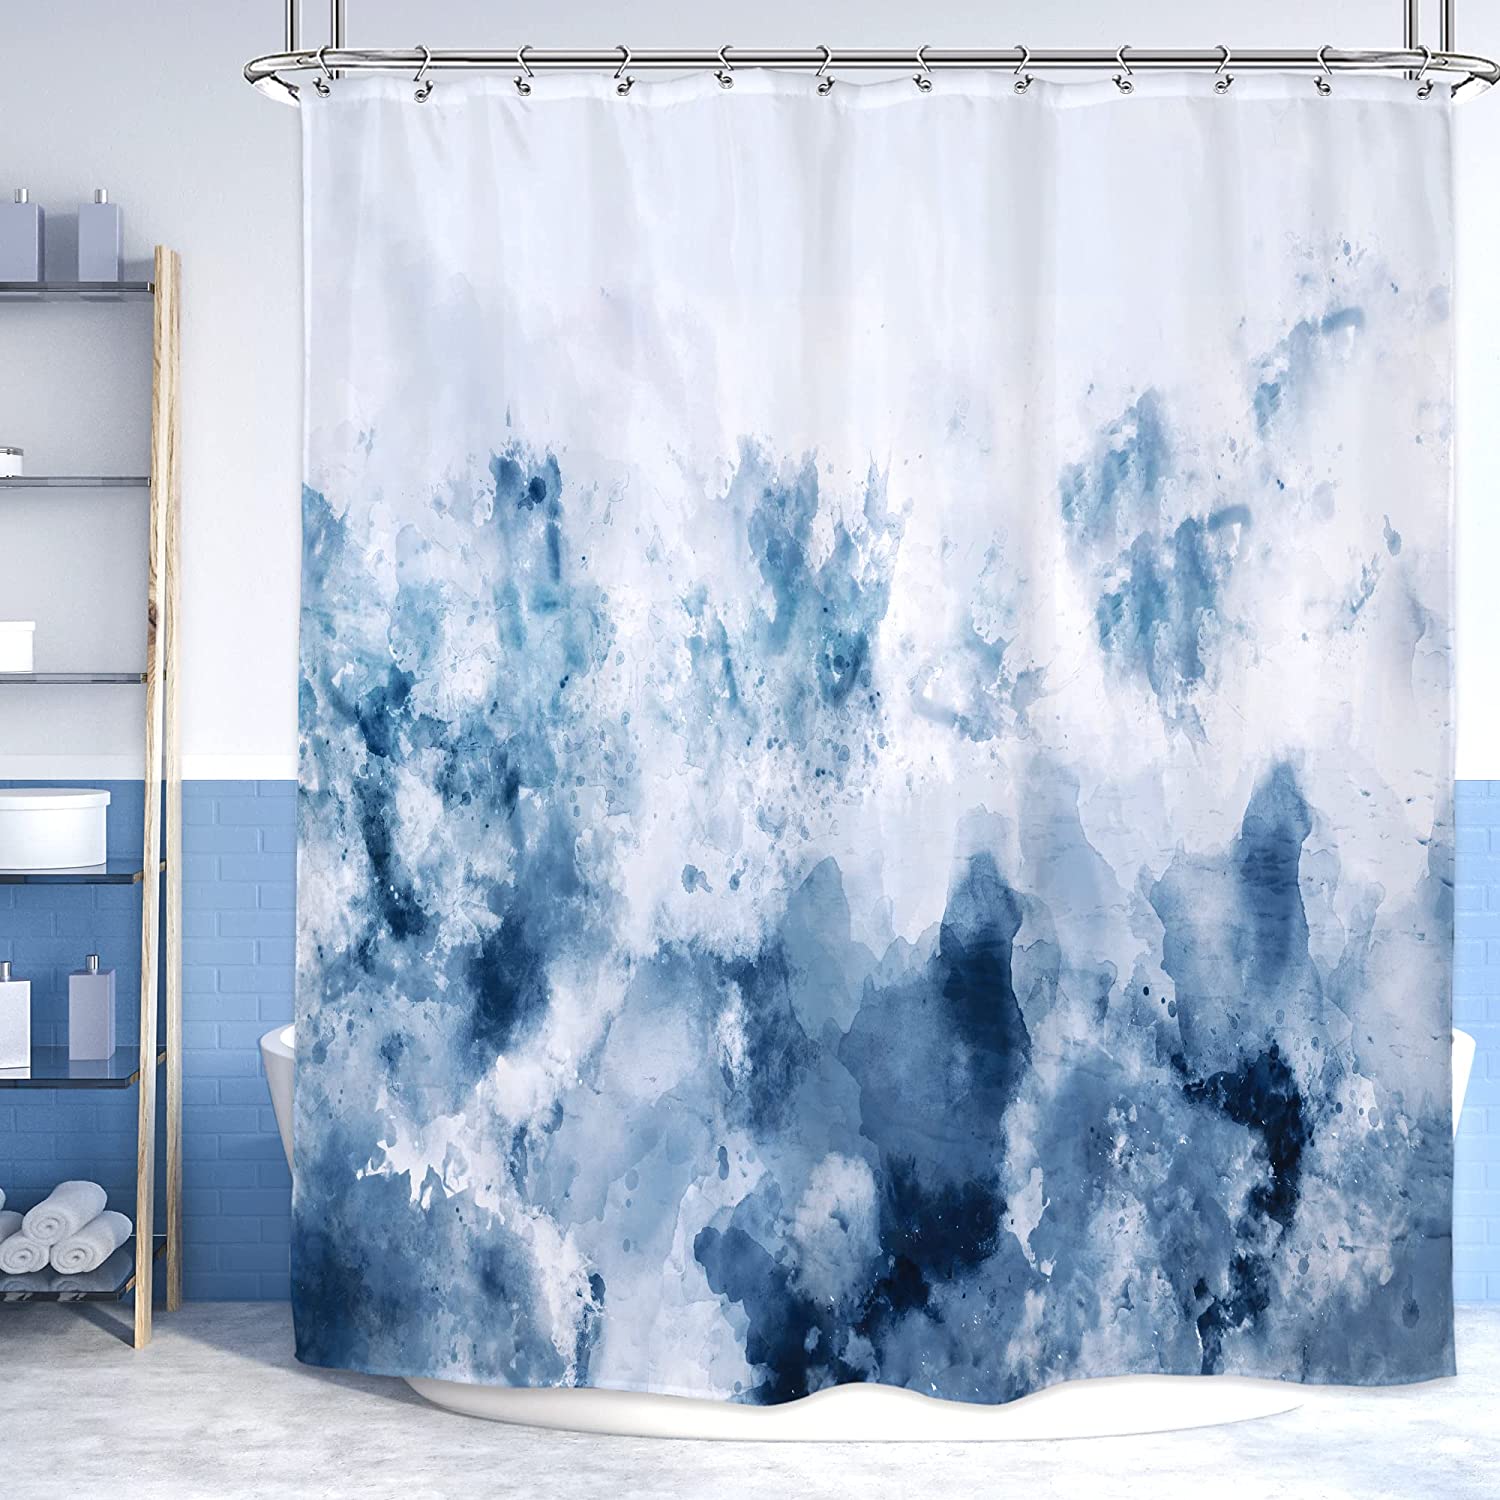 Pan na Abstract Watercolor Ombre Navy Blue Shower Curtains for Bathroom 72WX72H Inch Gray Cold White Modern Art Gradient Painting Decor Set Fabric Polyester 12 Pack Plastic Shower Hooks